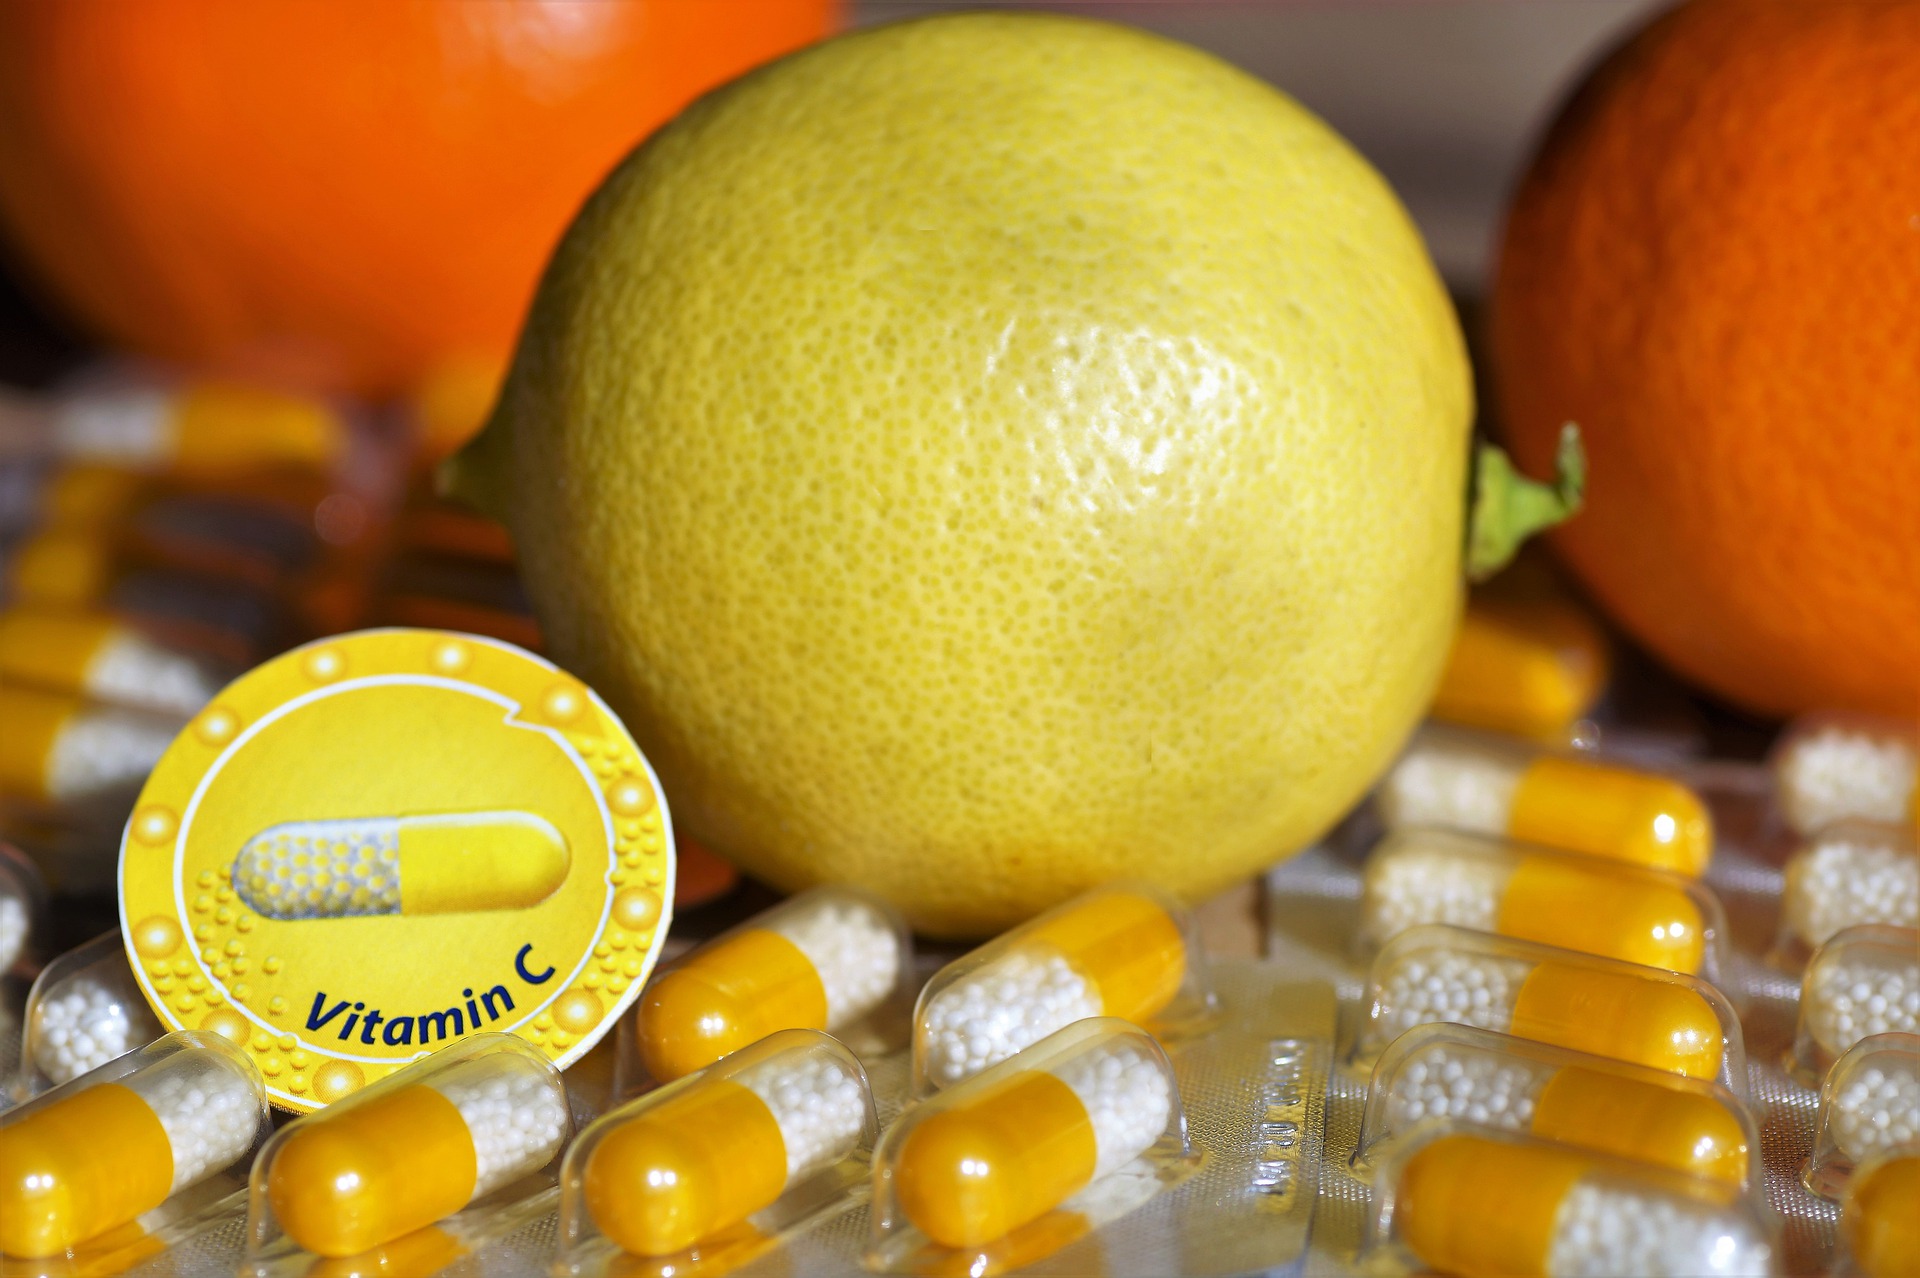 Vitamin C not only for the common cold. What else can the popular supplement help with?